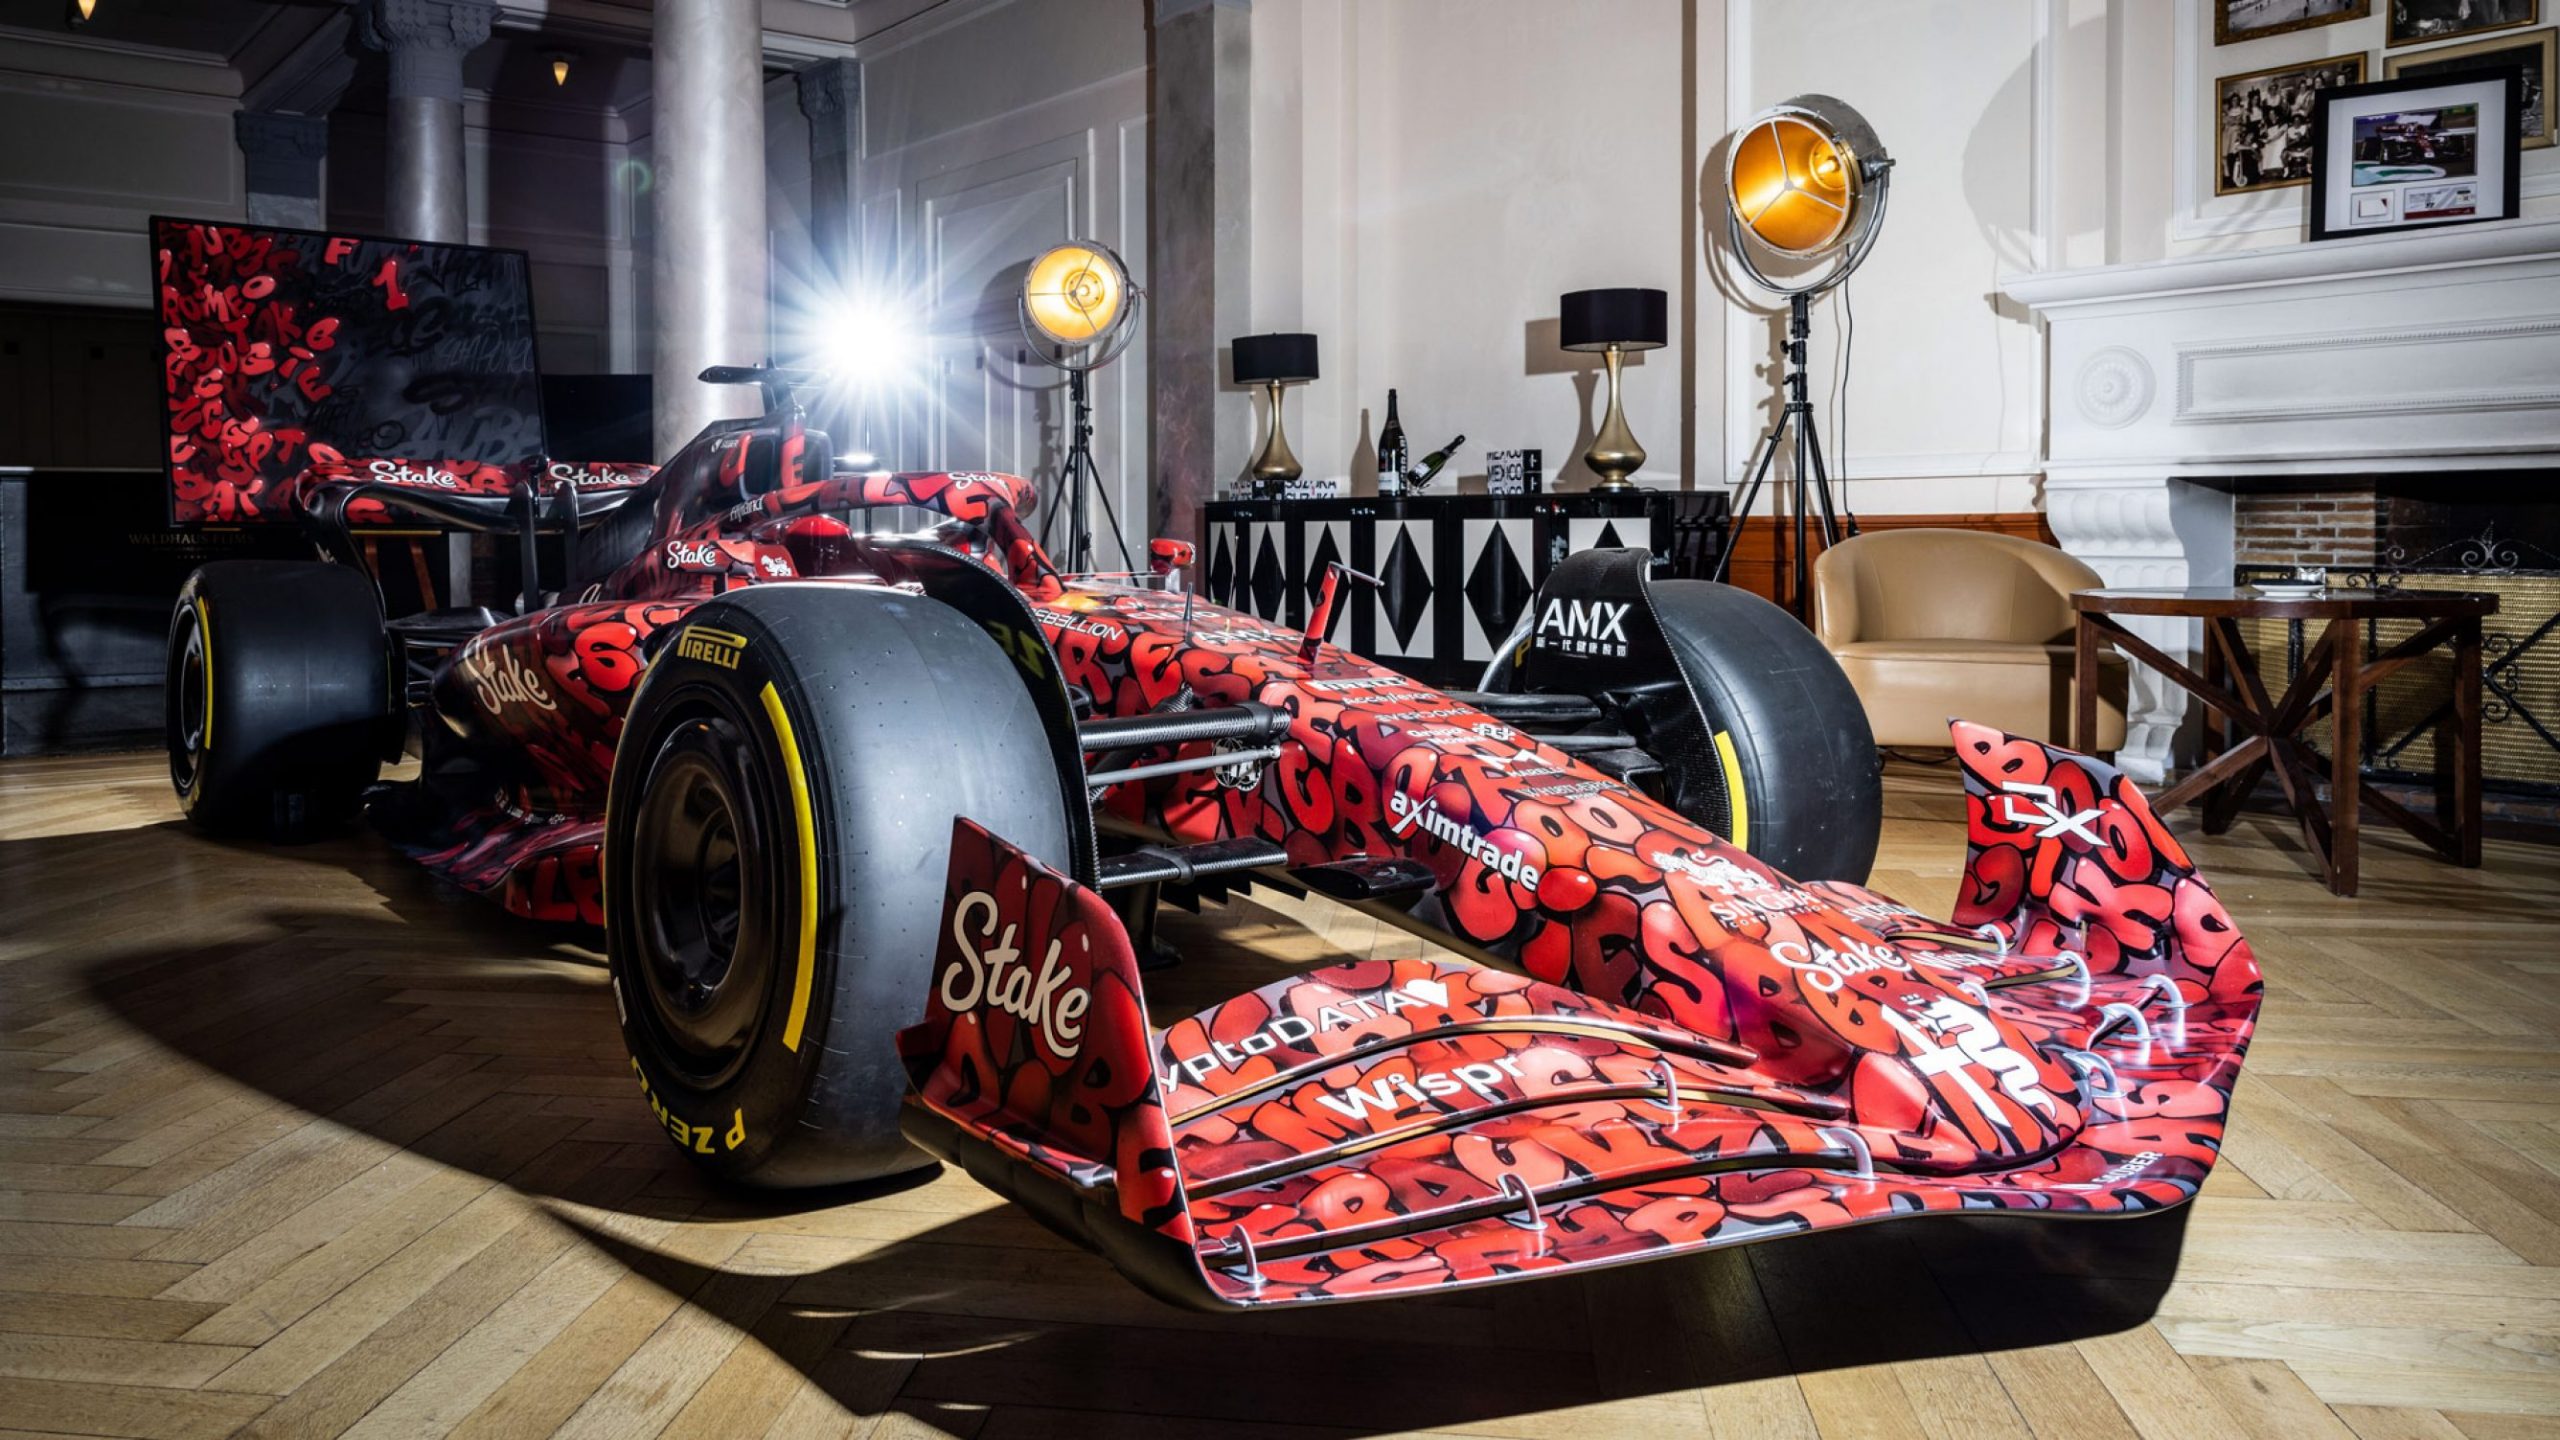 Alfa Romeo F1 Team Stake's unique art livery designed by Swiss-based artist BOOGIE to raise funds for Save the Children.